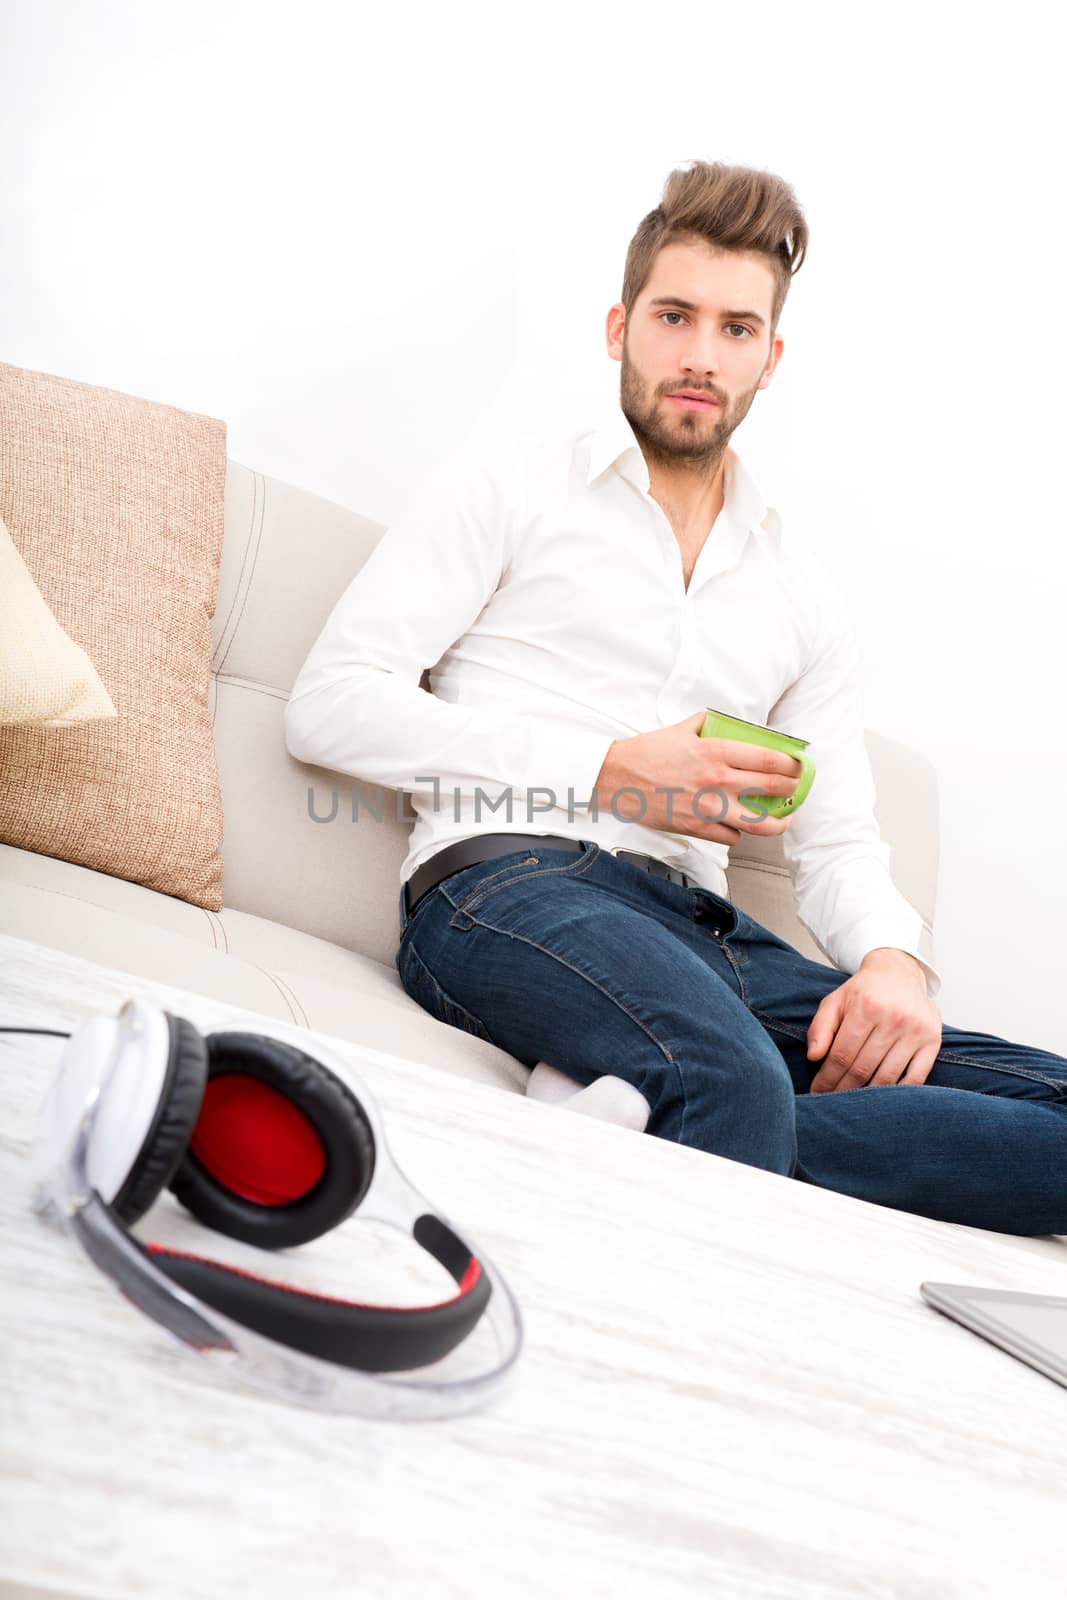 A young adult man sitting on the couch holding coffee.
